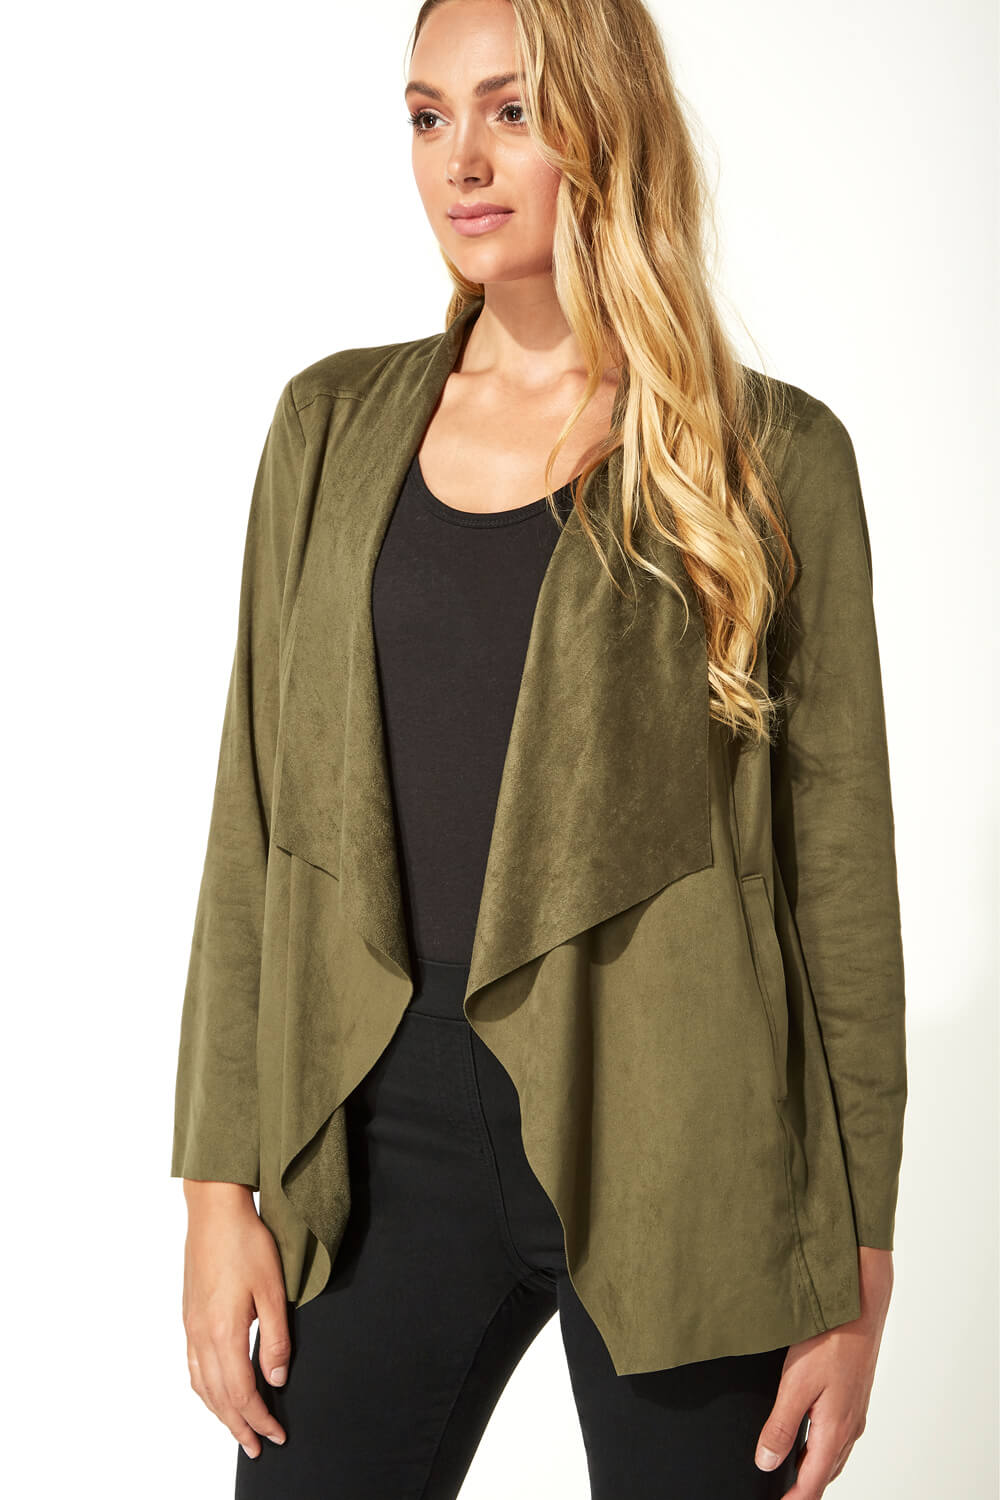 Dark Green Faux Suede Waterfall Front Jacket, Image 4 of 5